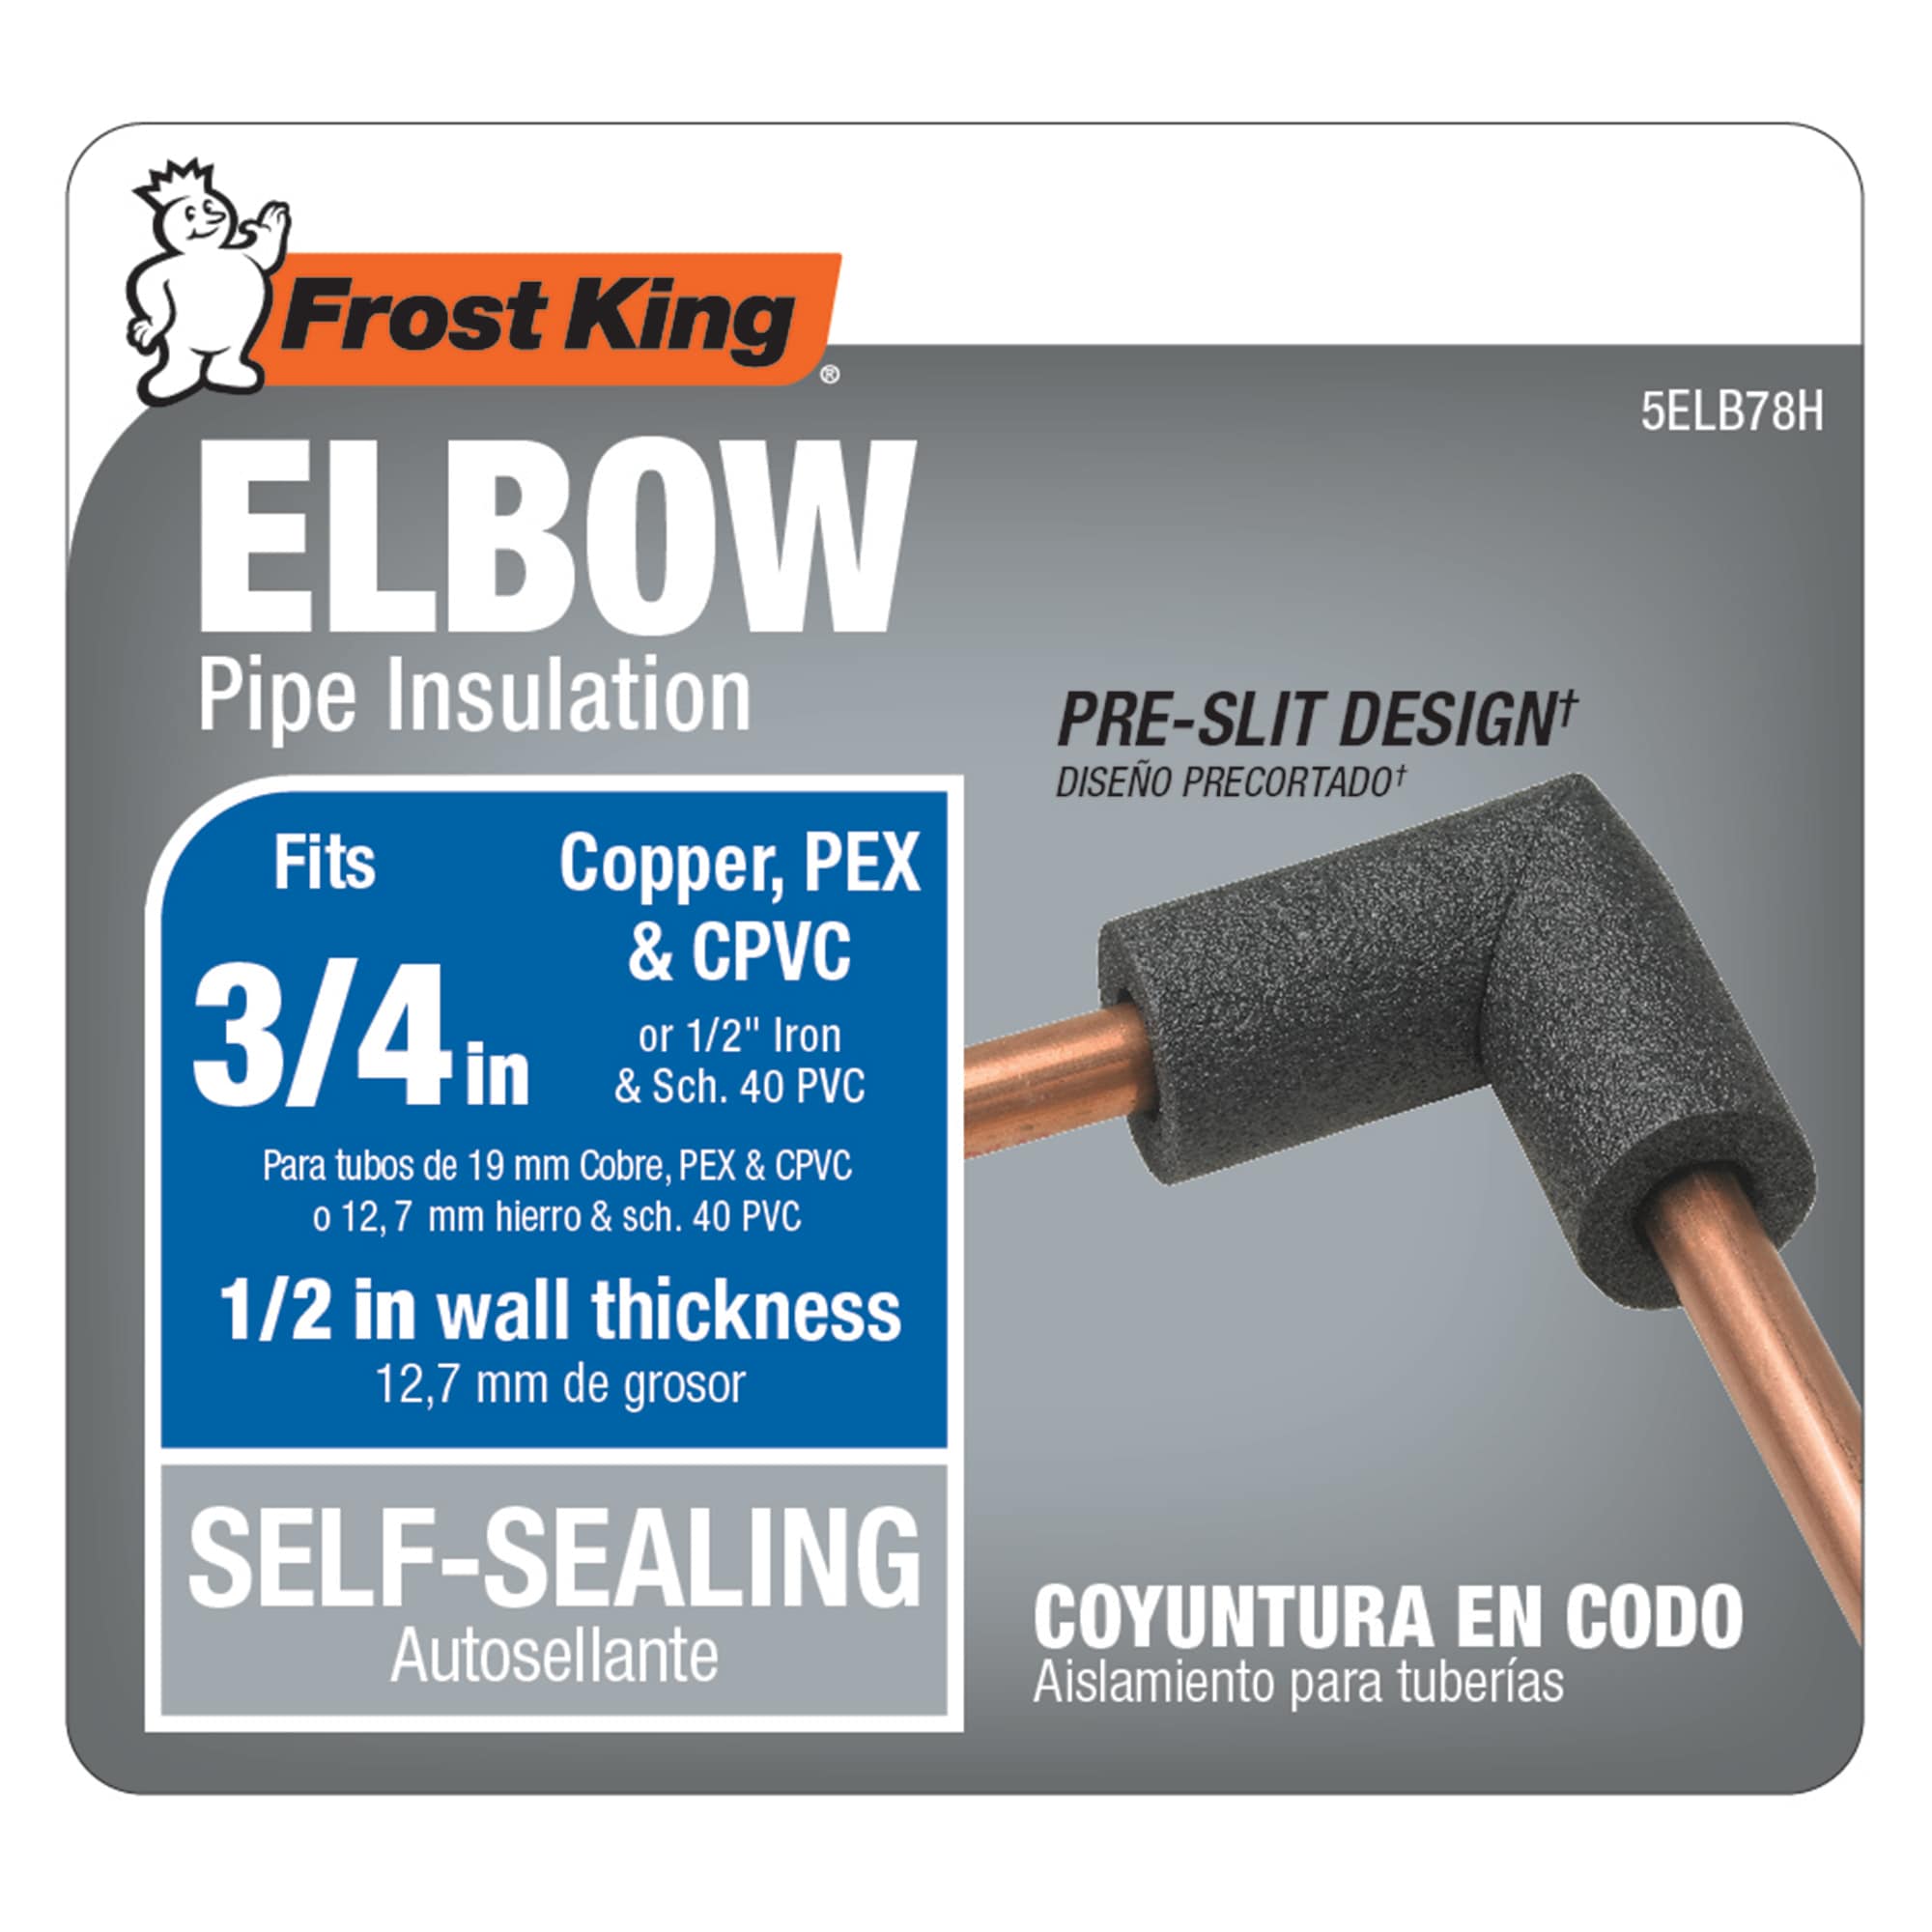 Pipe Insulation at